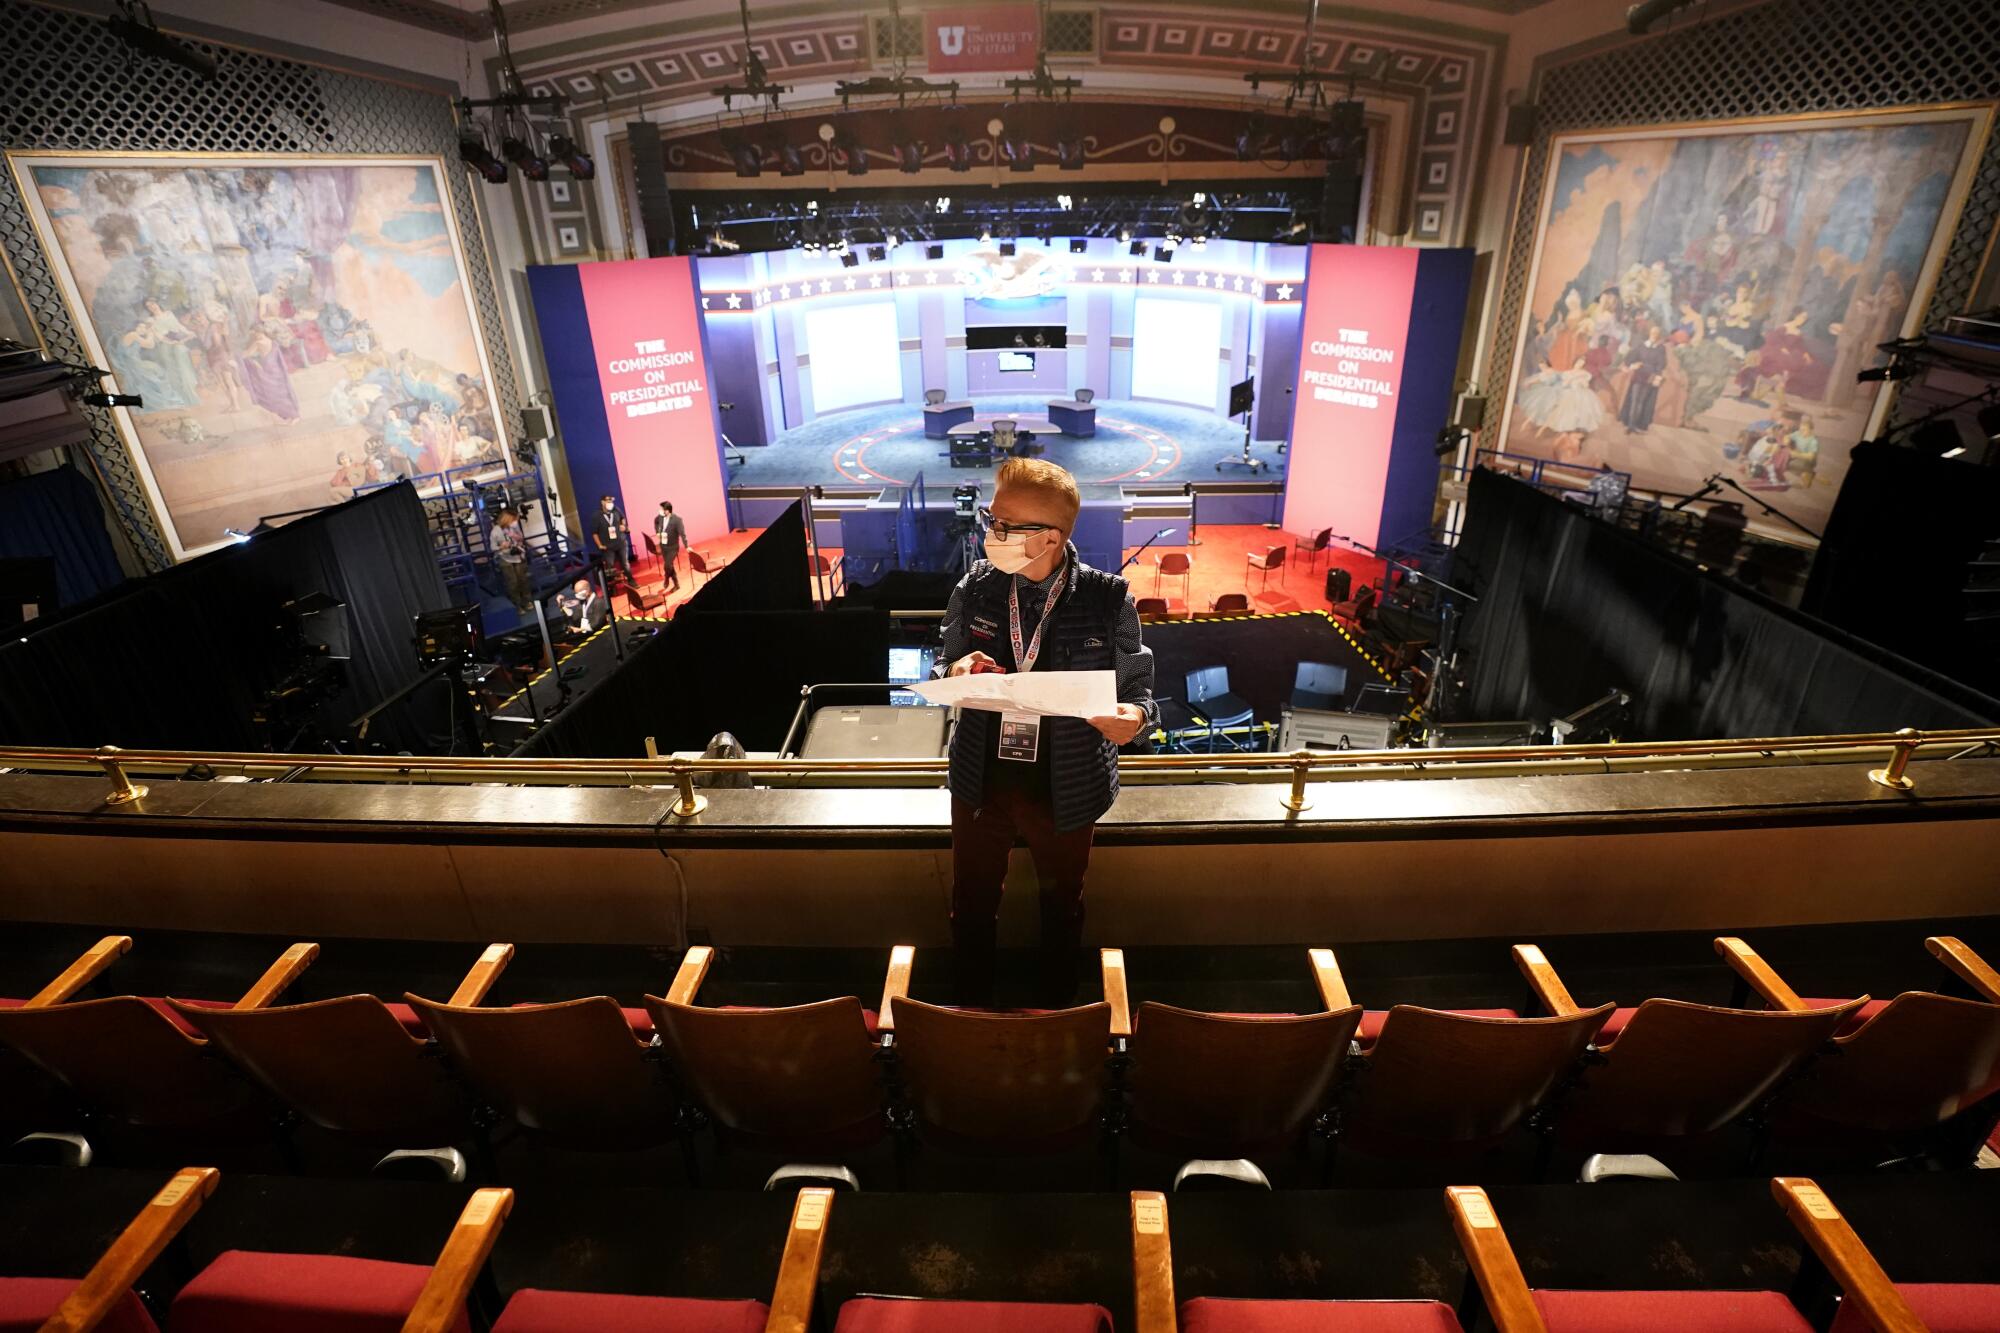 A member of the production staff in the debate hall.